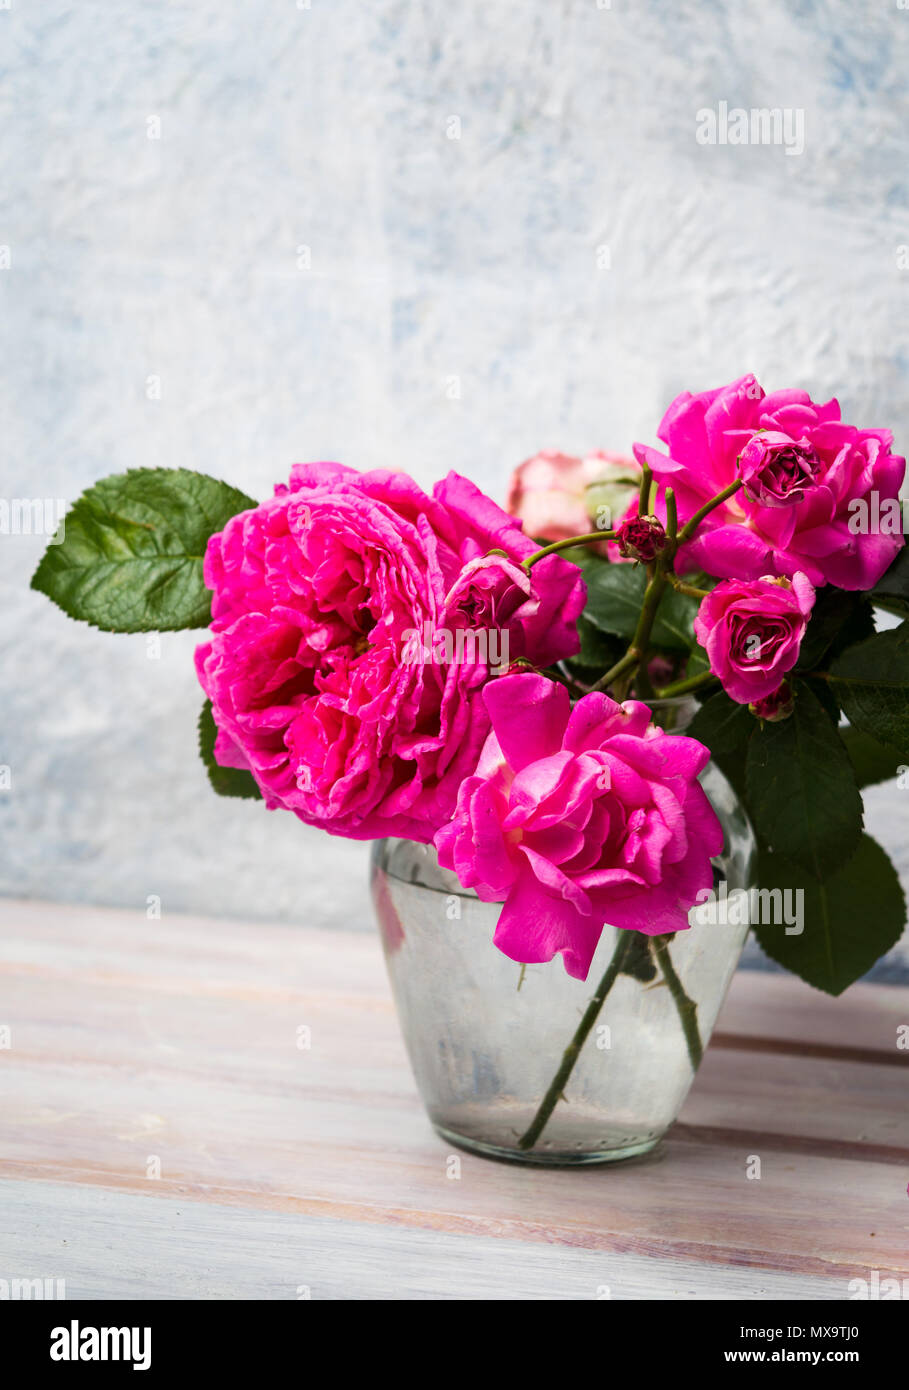 Homegrown rose flowers in blossom in a vase Stock Photo